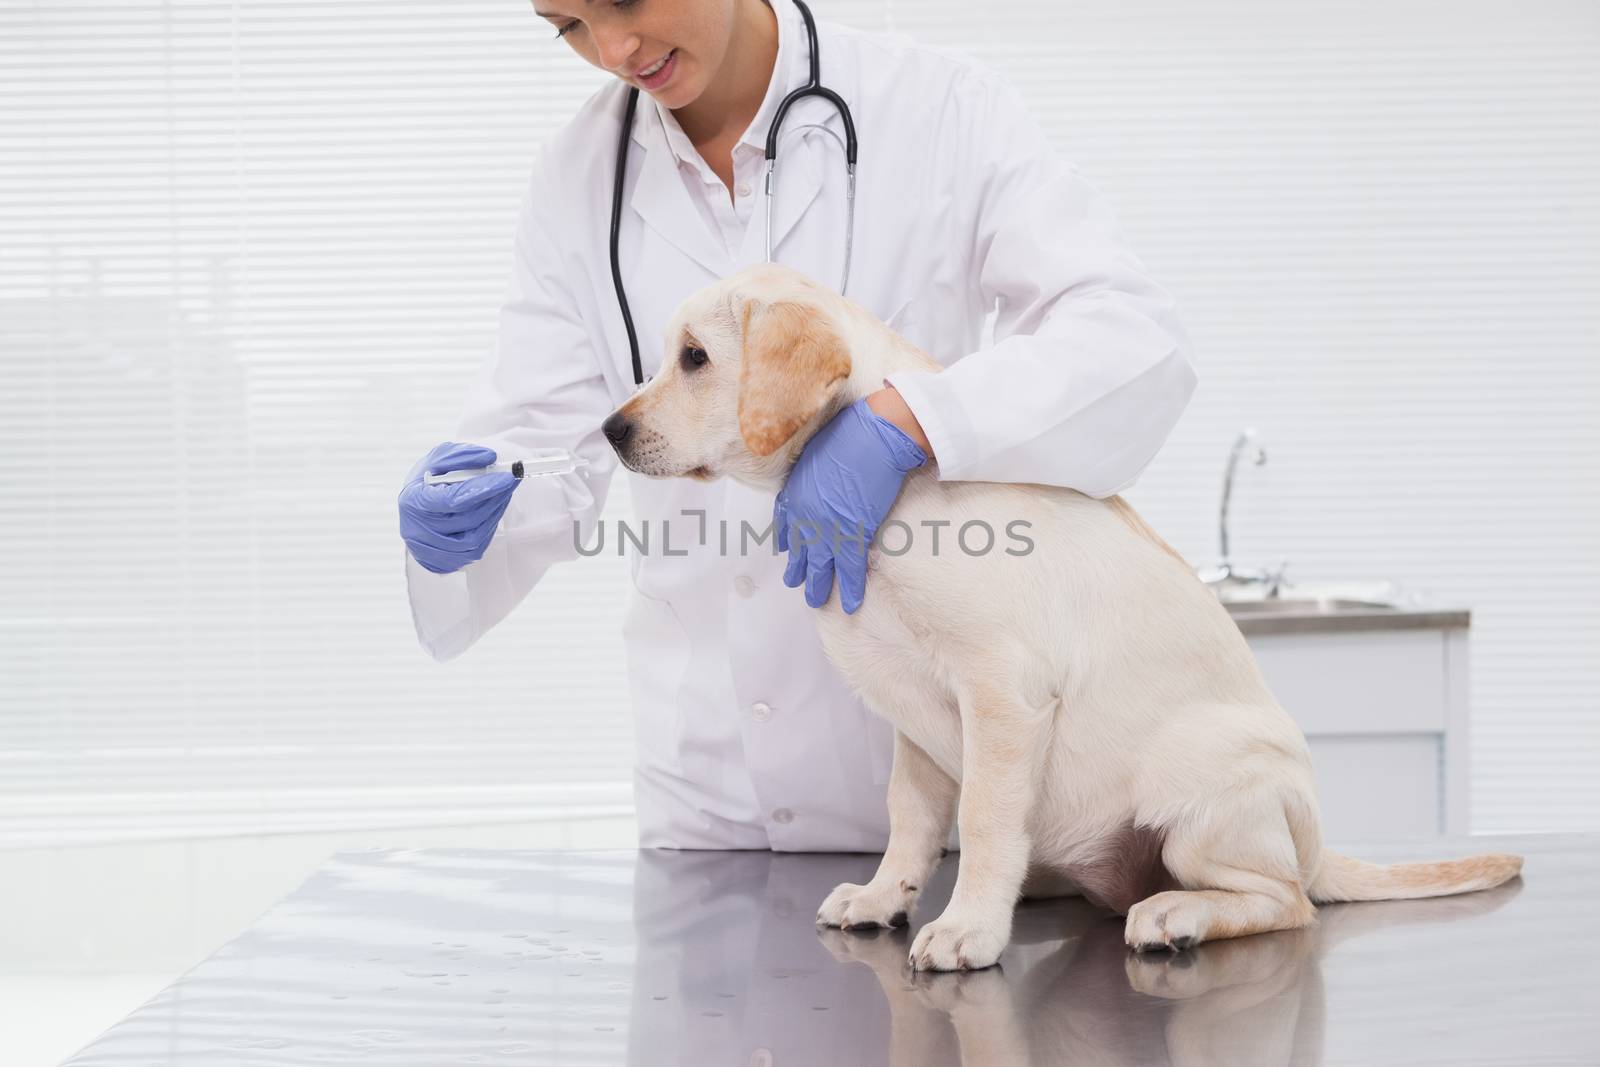 Veterinarian doing check up at a cute dog in medical office